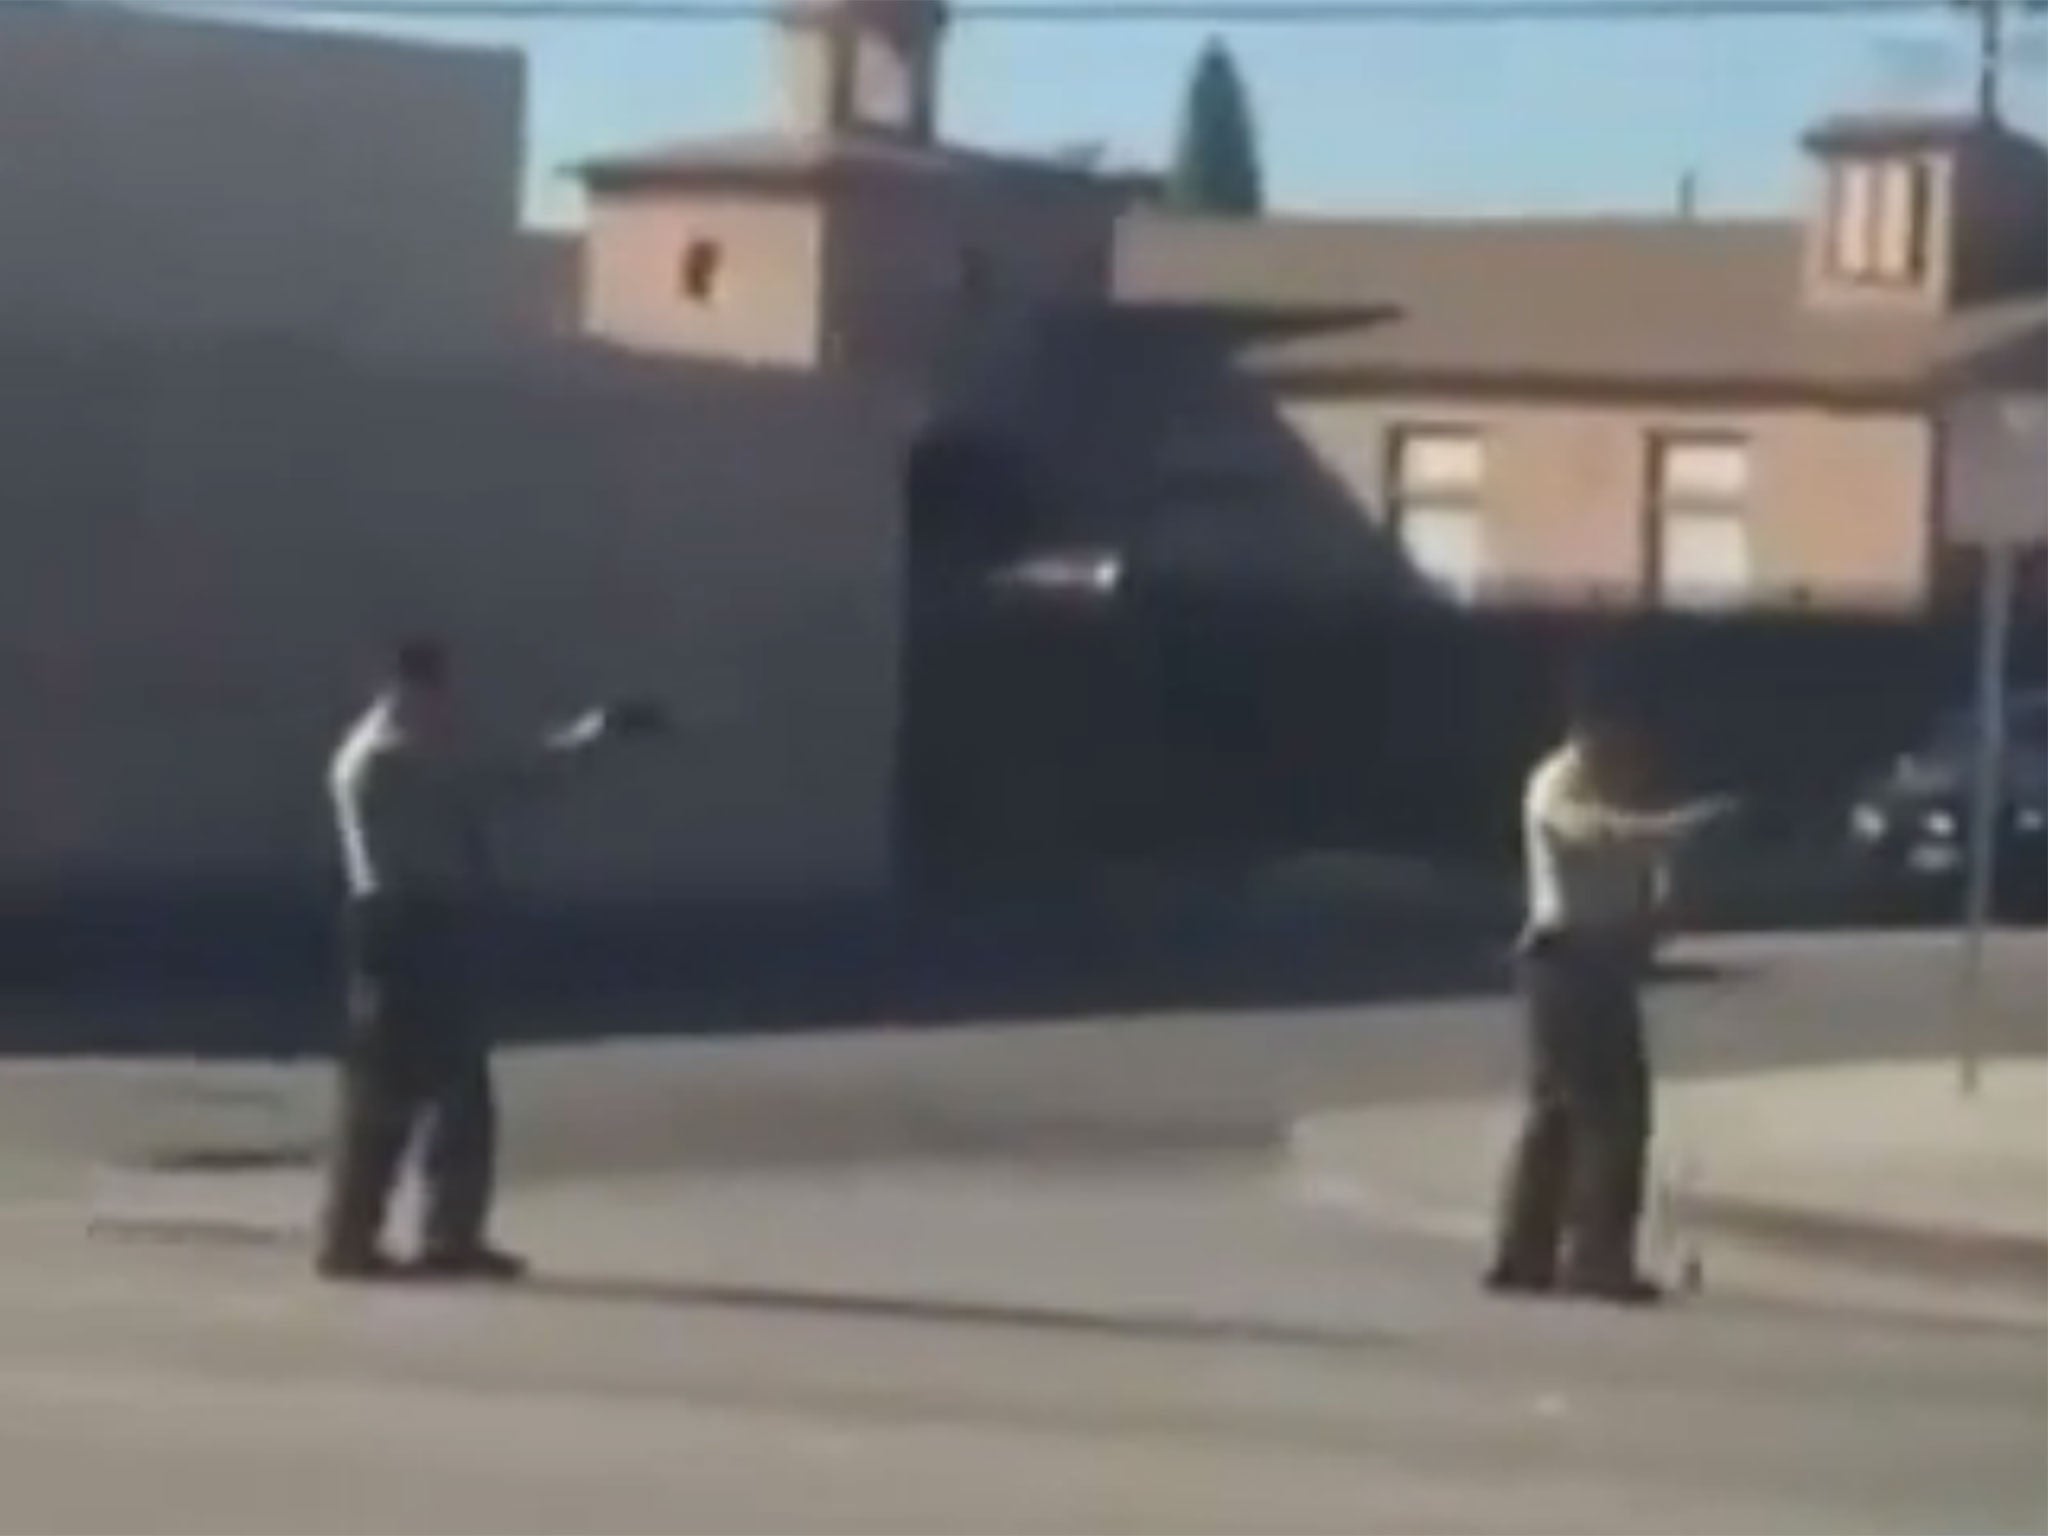 Still from a video purporting to show the shooting of a suspect by police in LA